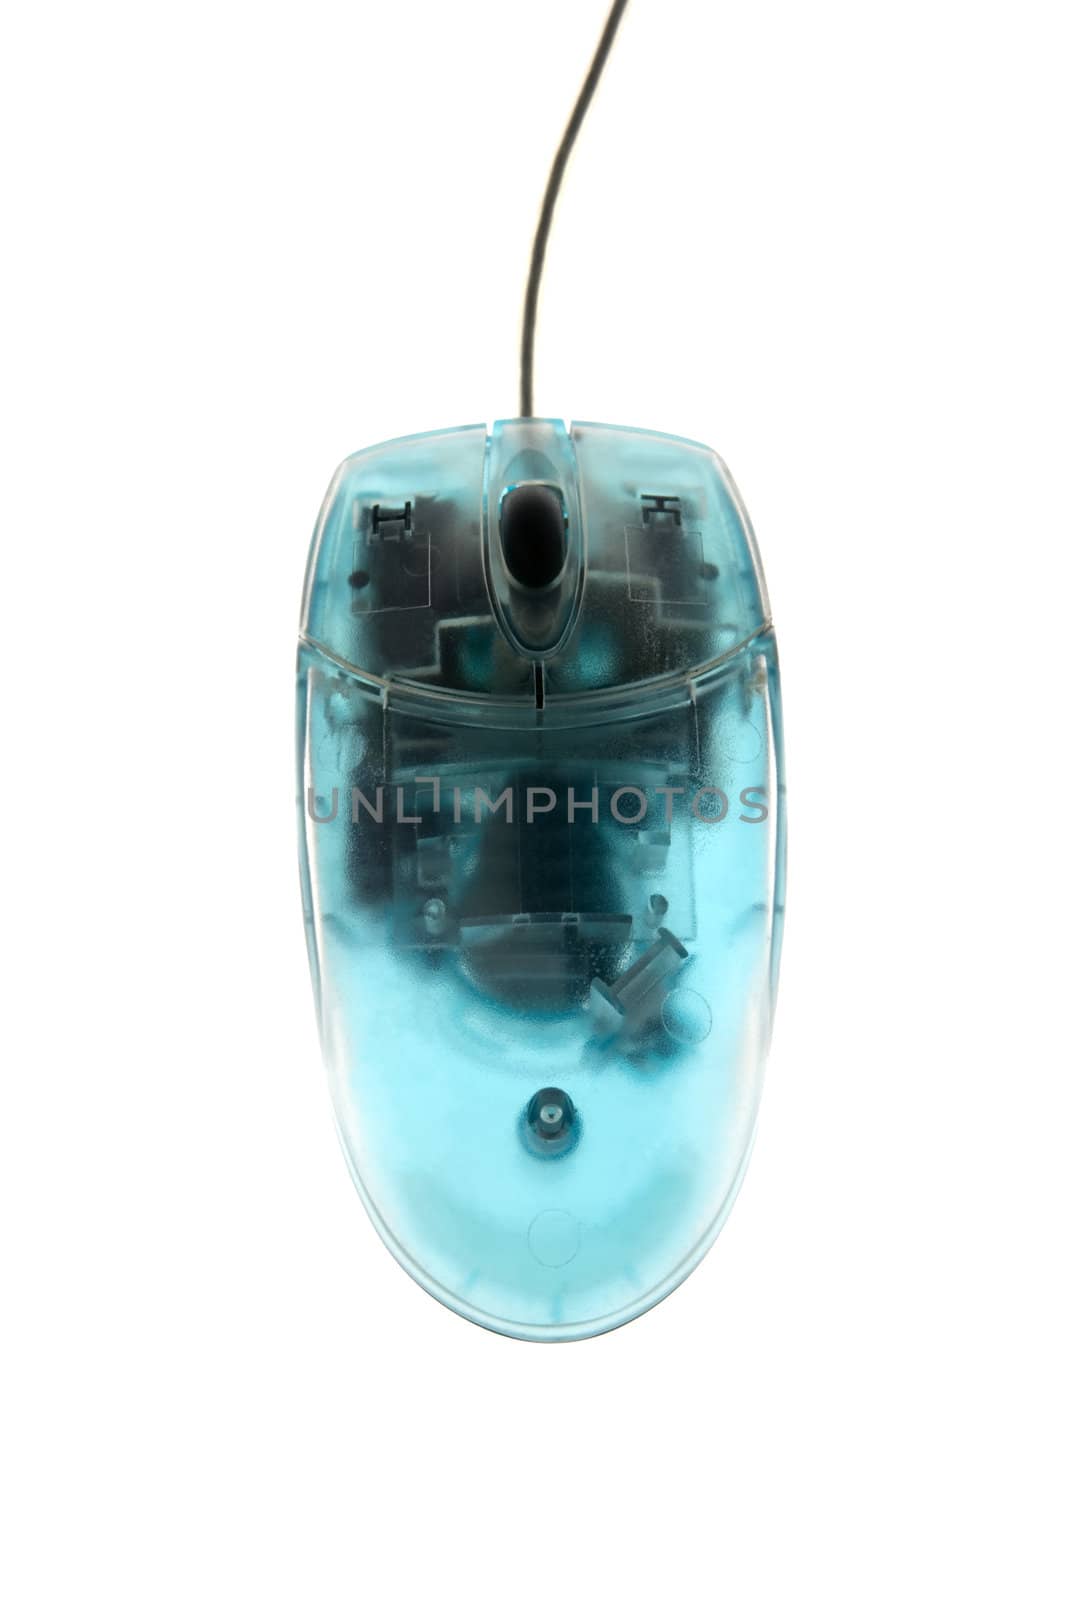 Blue Computer Mouse on white background